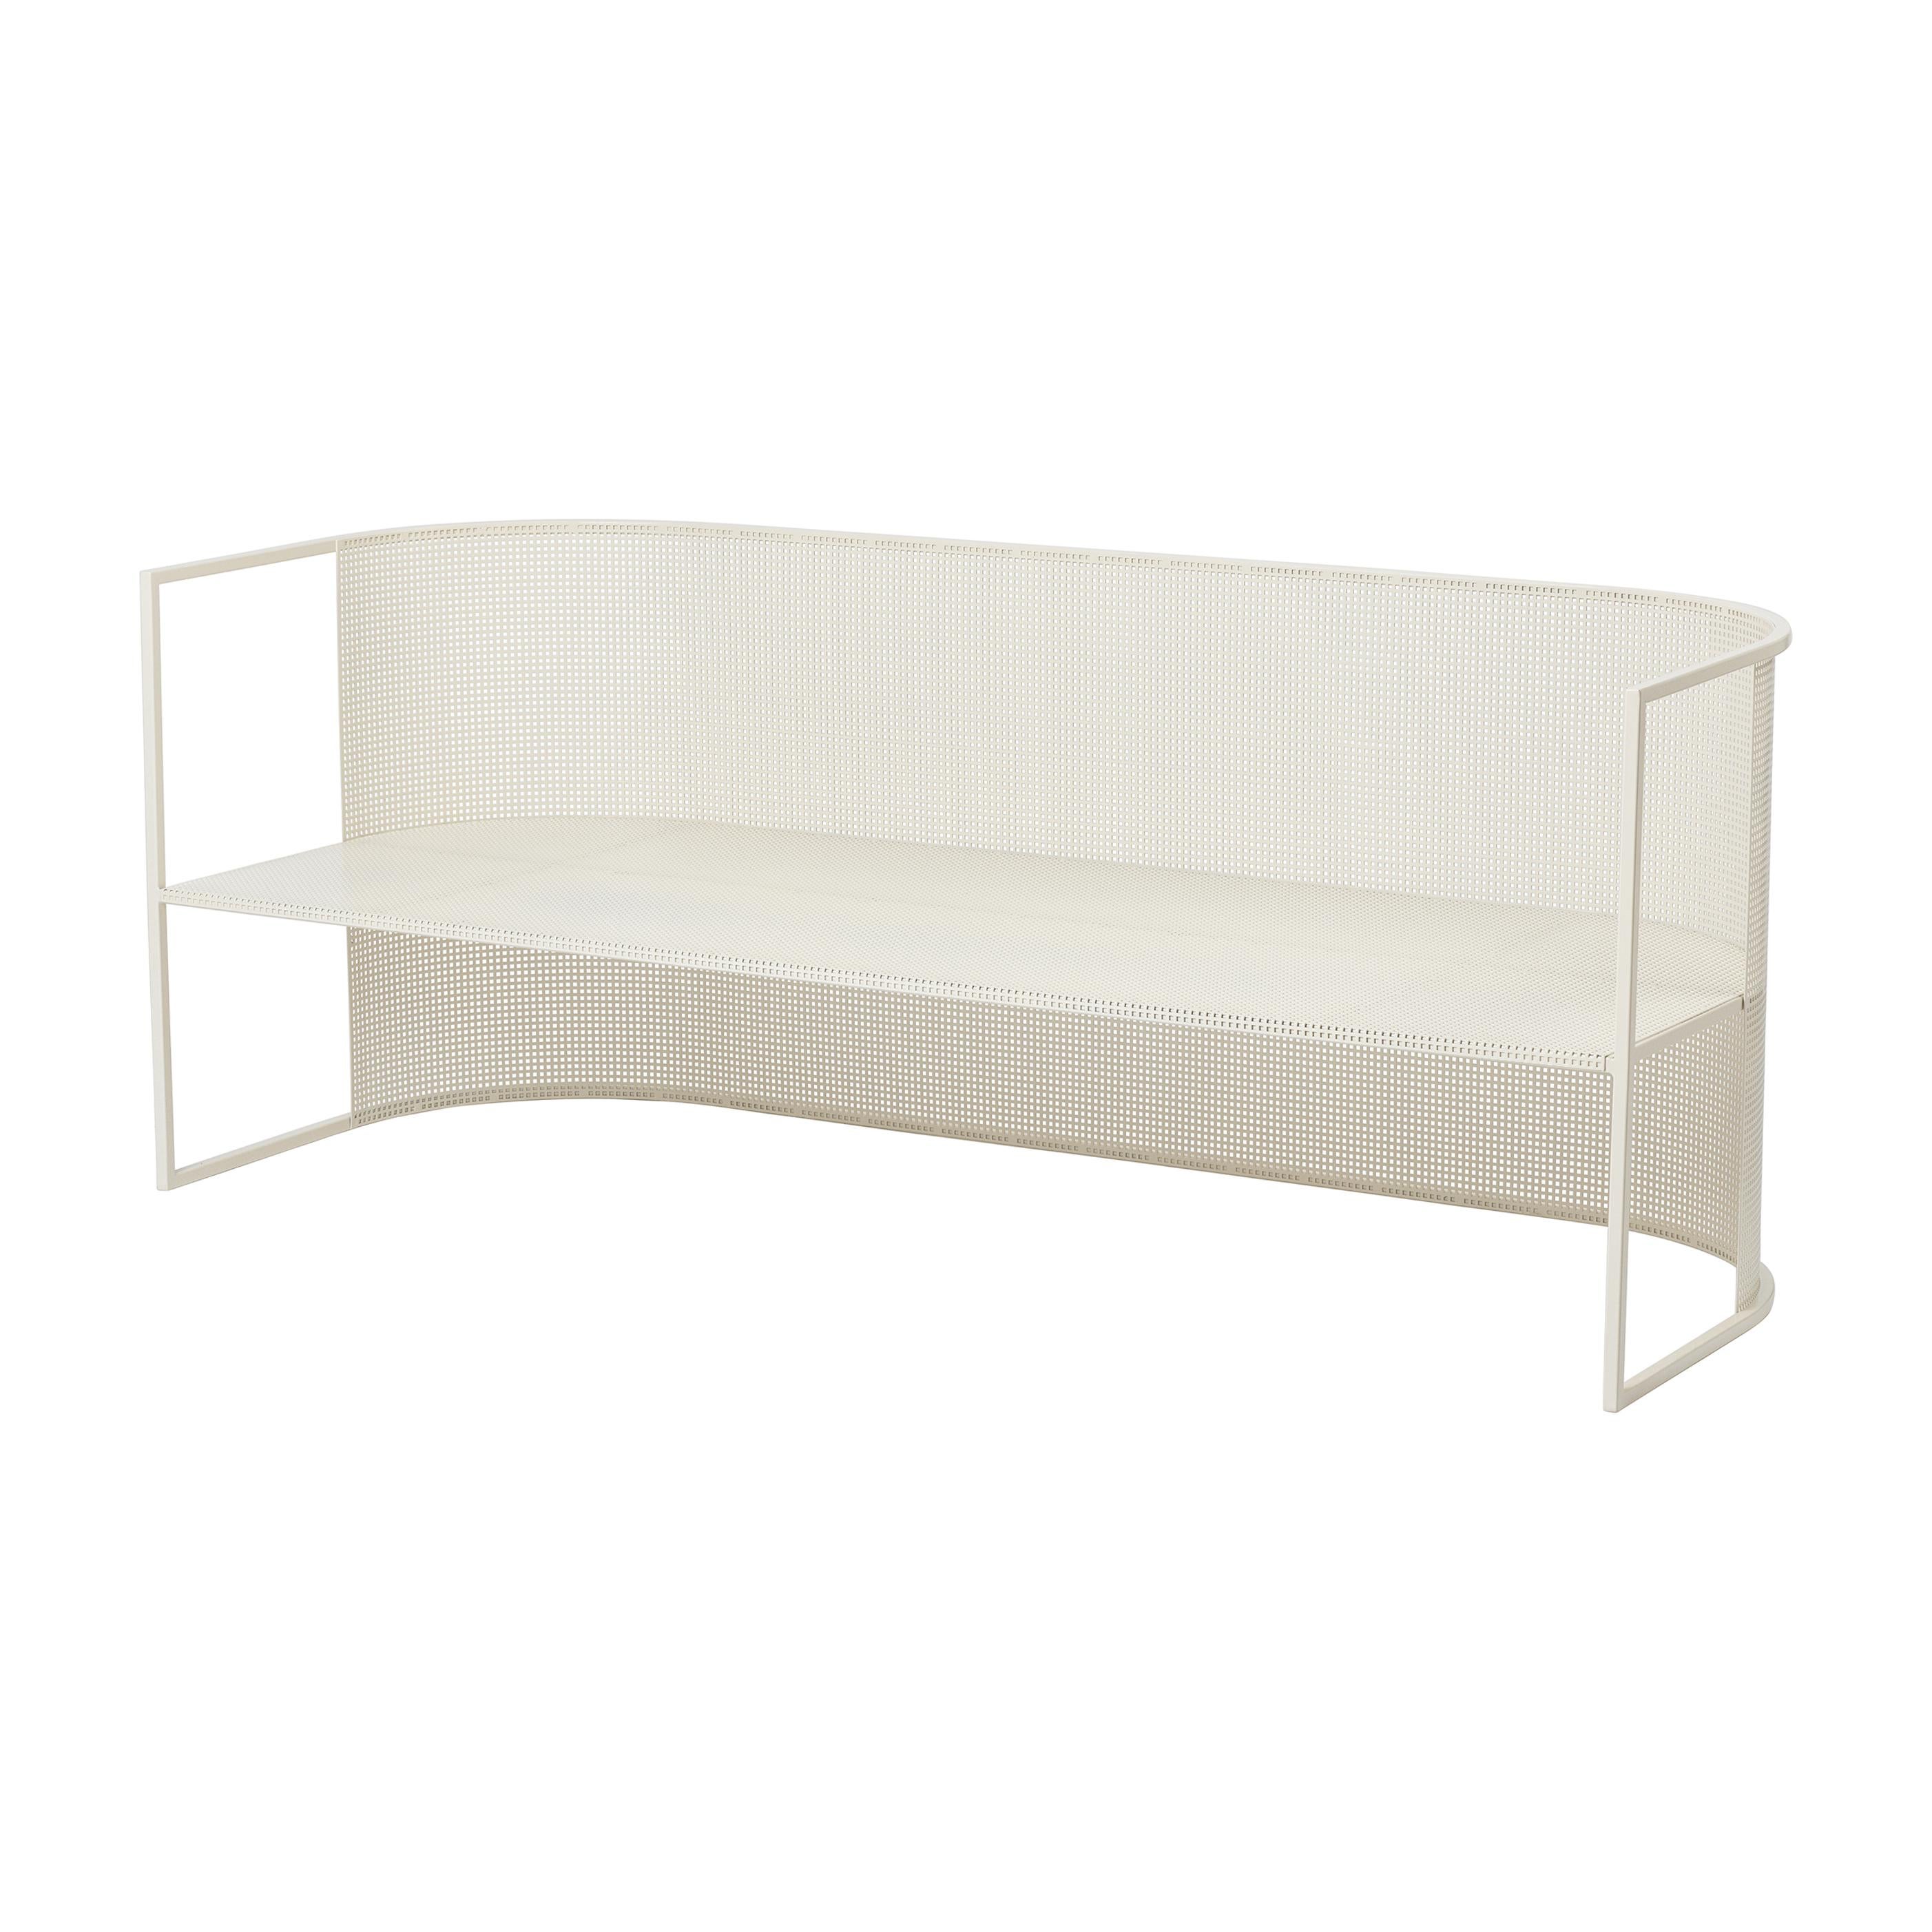 Steel Bahaus lounge bench by Kristina Dam Studio
Materials: Beige outdoor powder-coated steel
Dimensions: 170 x 67 x 64 cm

*Safe to use outdoor.

Dimensions cannot be customized.

Kristina Dam graduated from The Royal Danish School of Fine